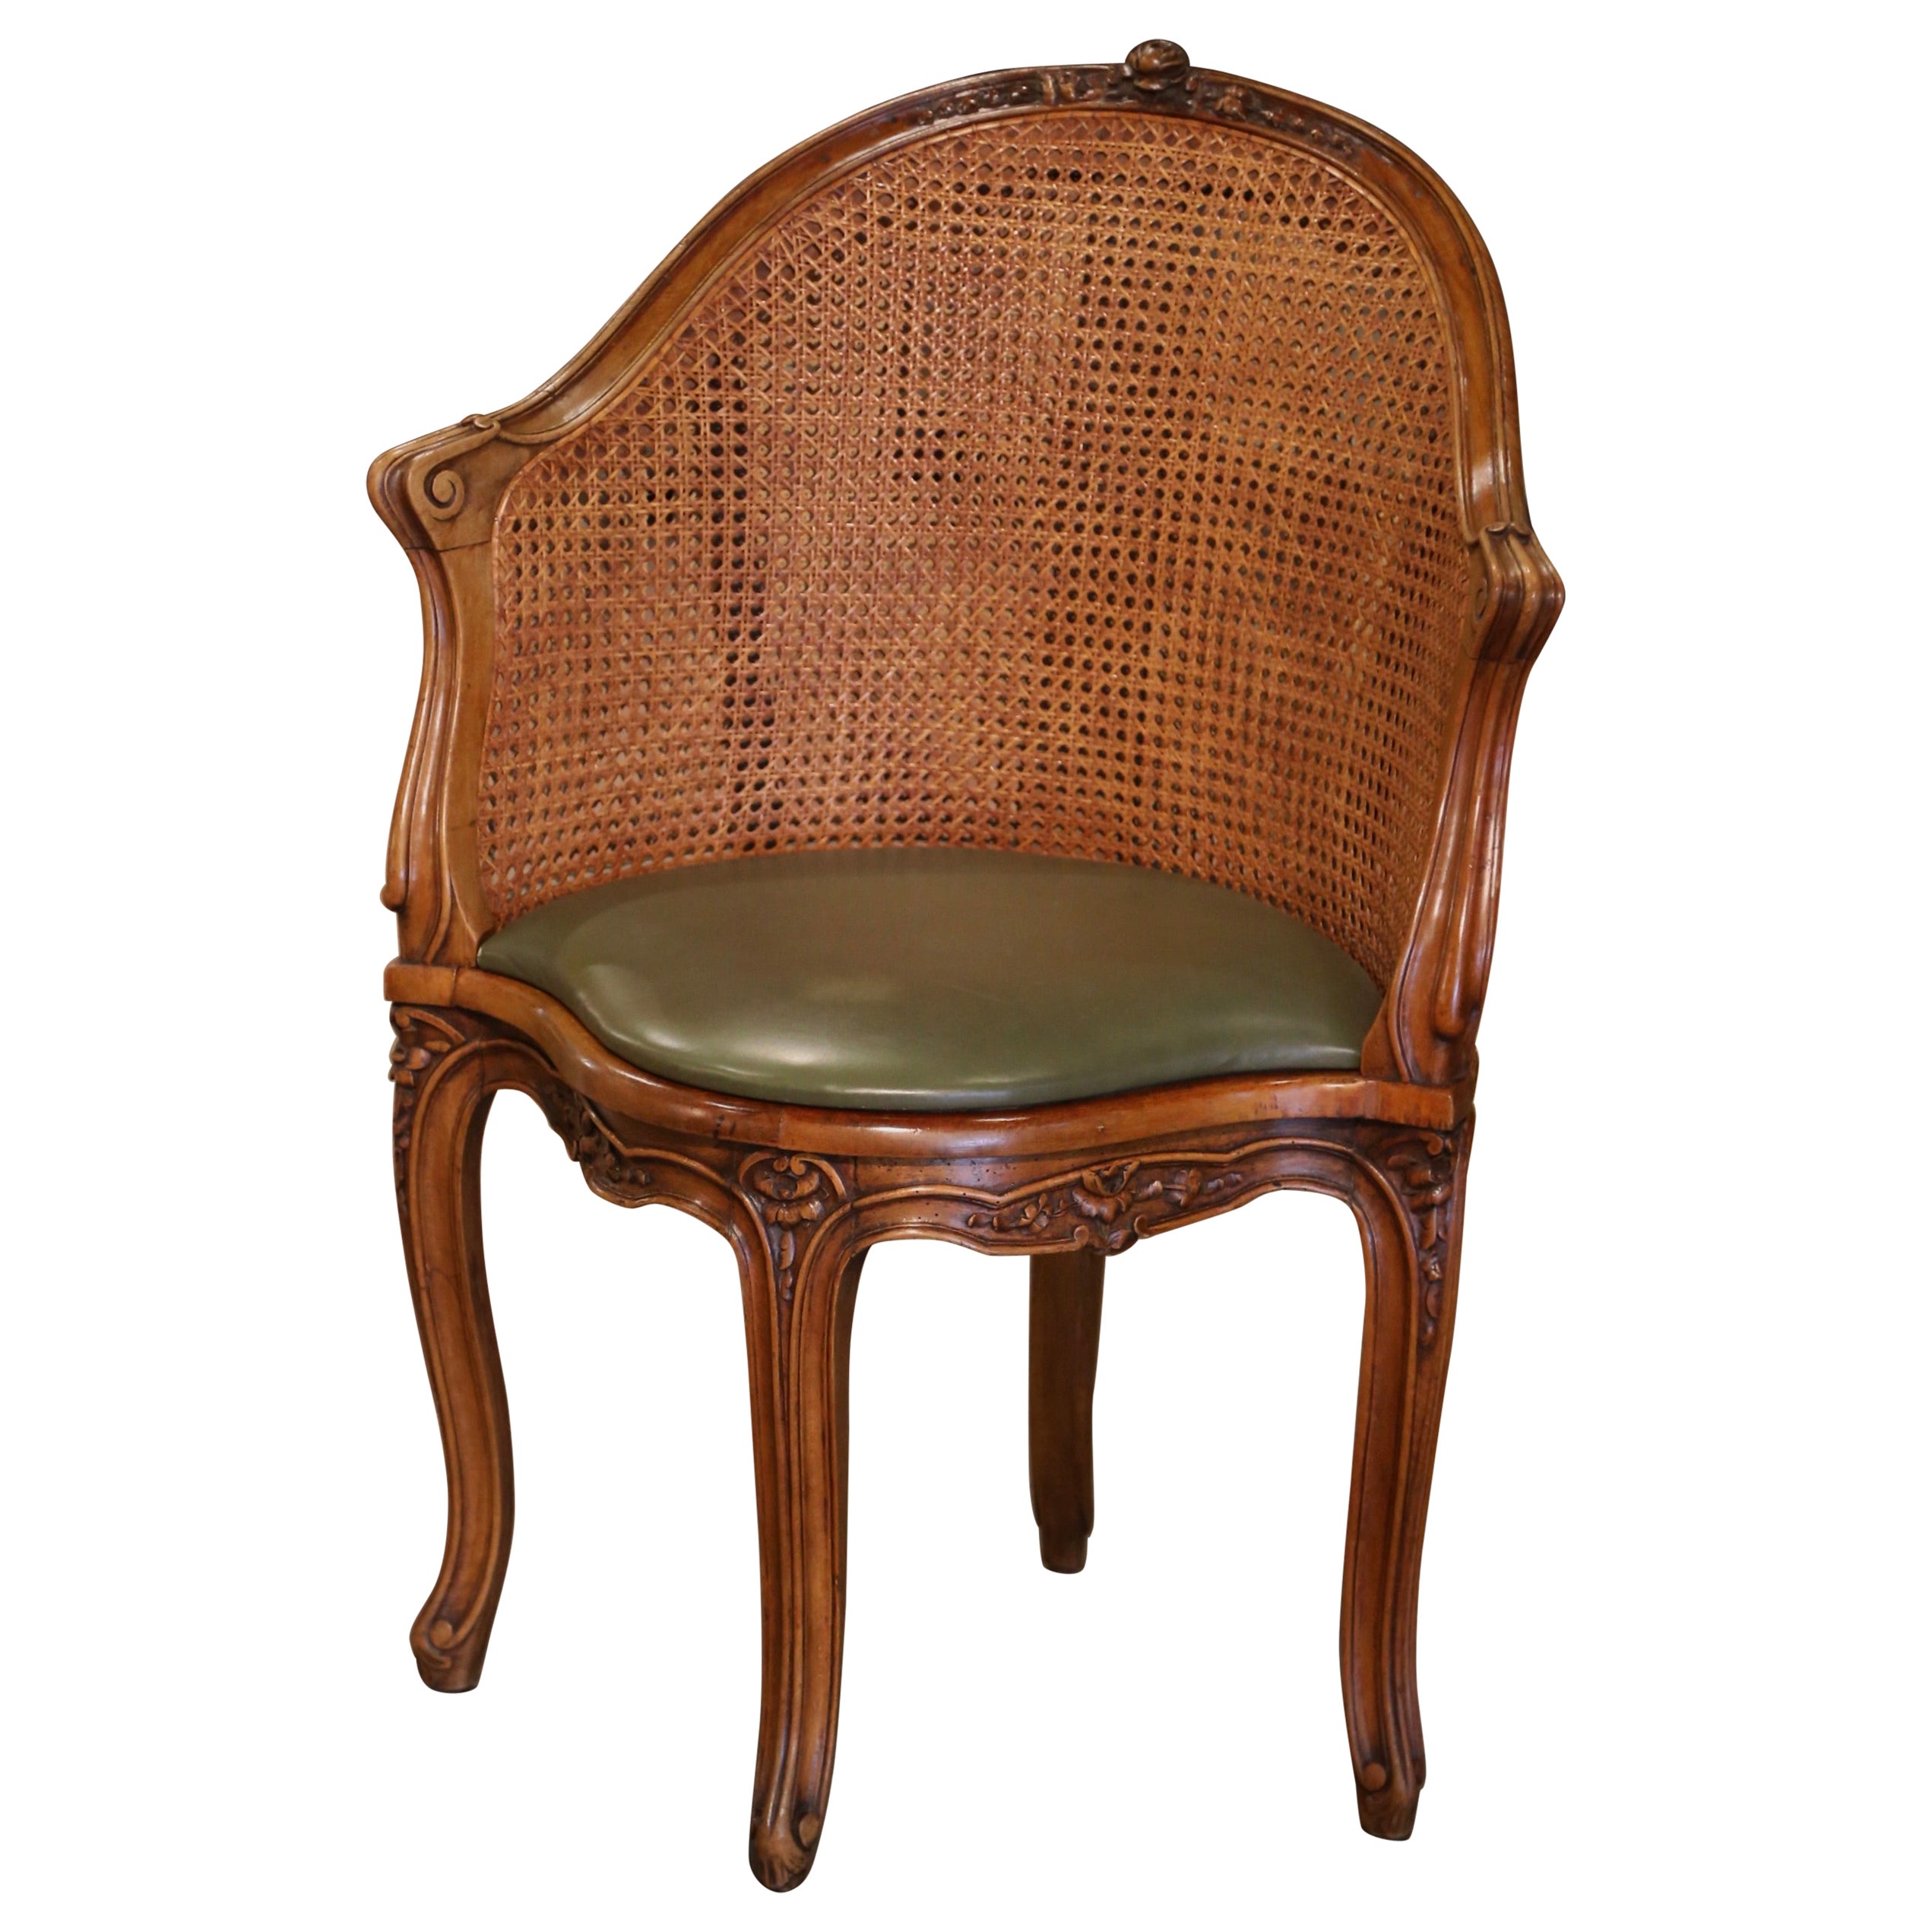 19th Century French Louis XV Carved Walnut and Cane Desk Armchair with Cushion